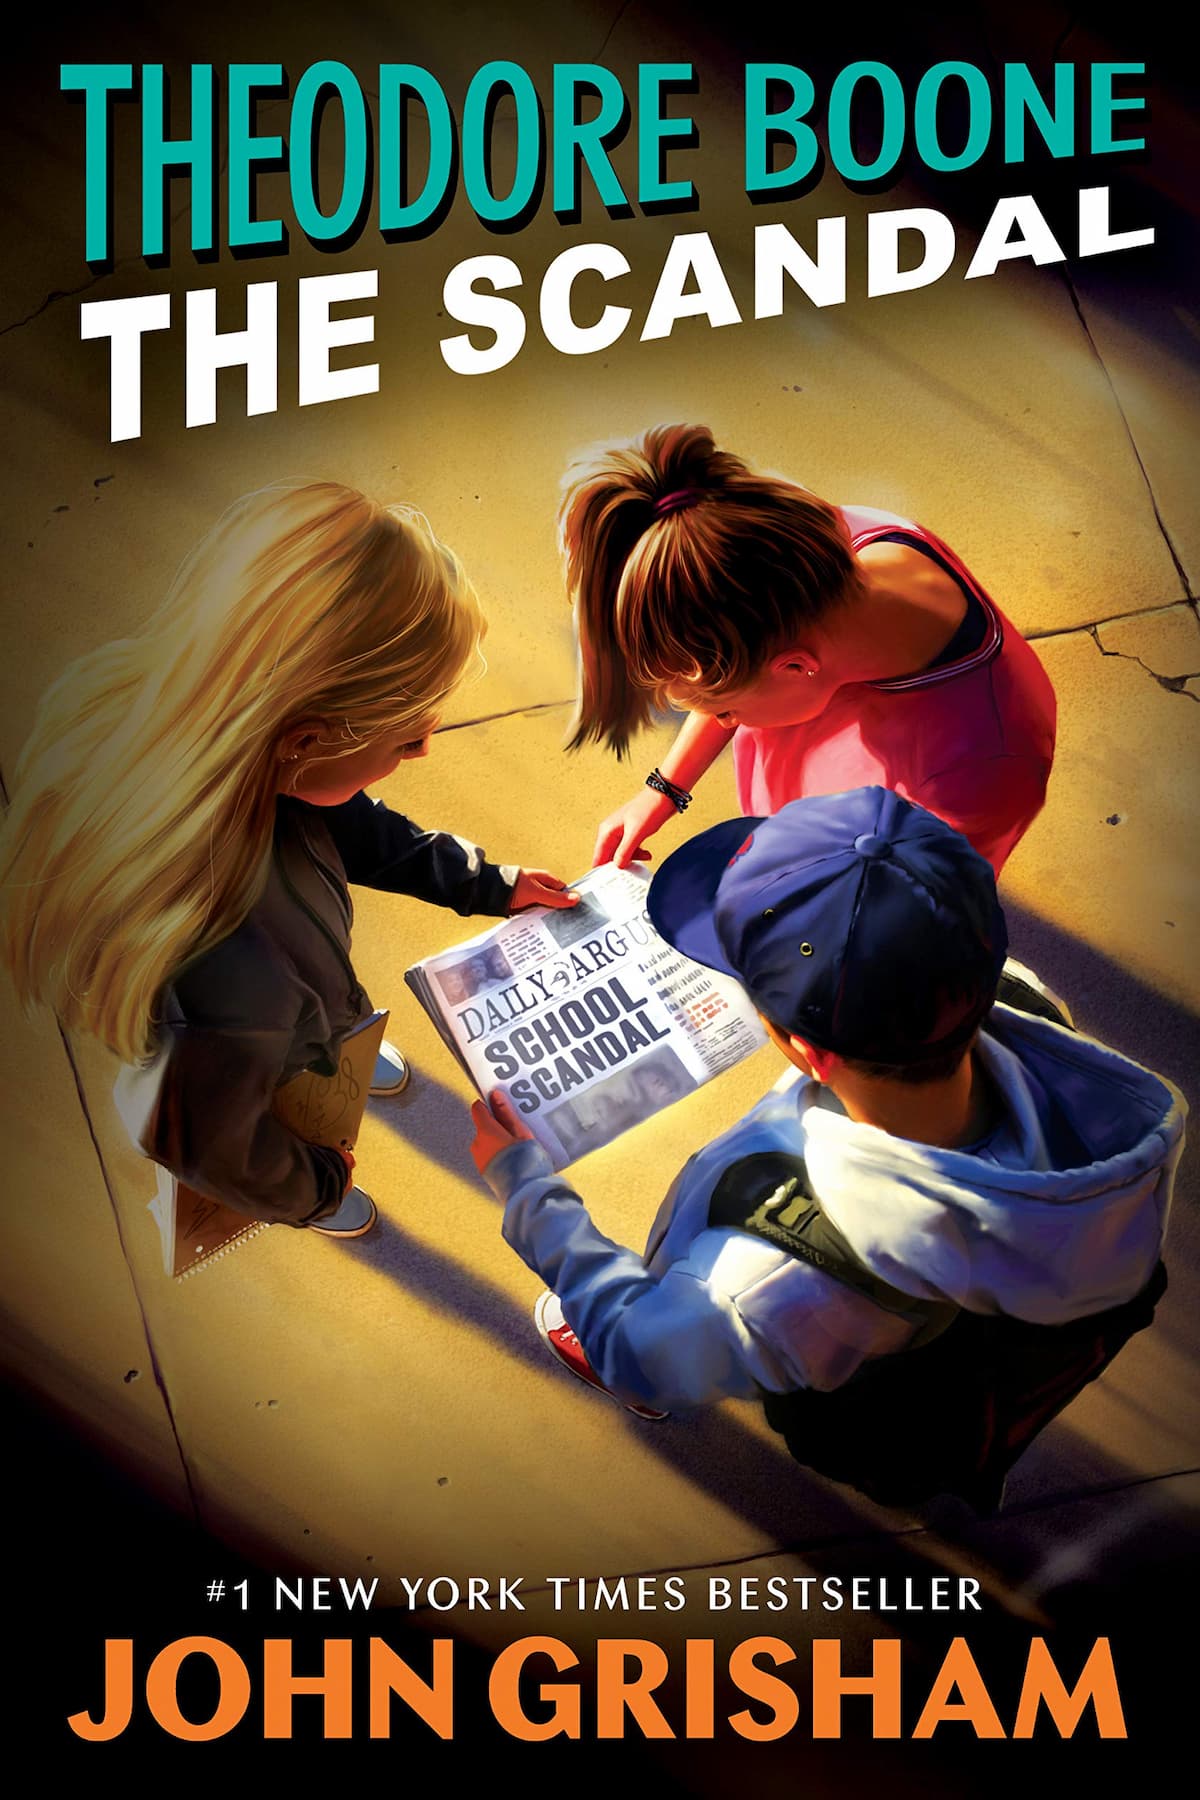 The Scandal - John Grisham (Theodore Boone Series Book 6) can be a great help to those who seek to recharge their energy levels during the holidays.